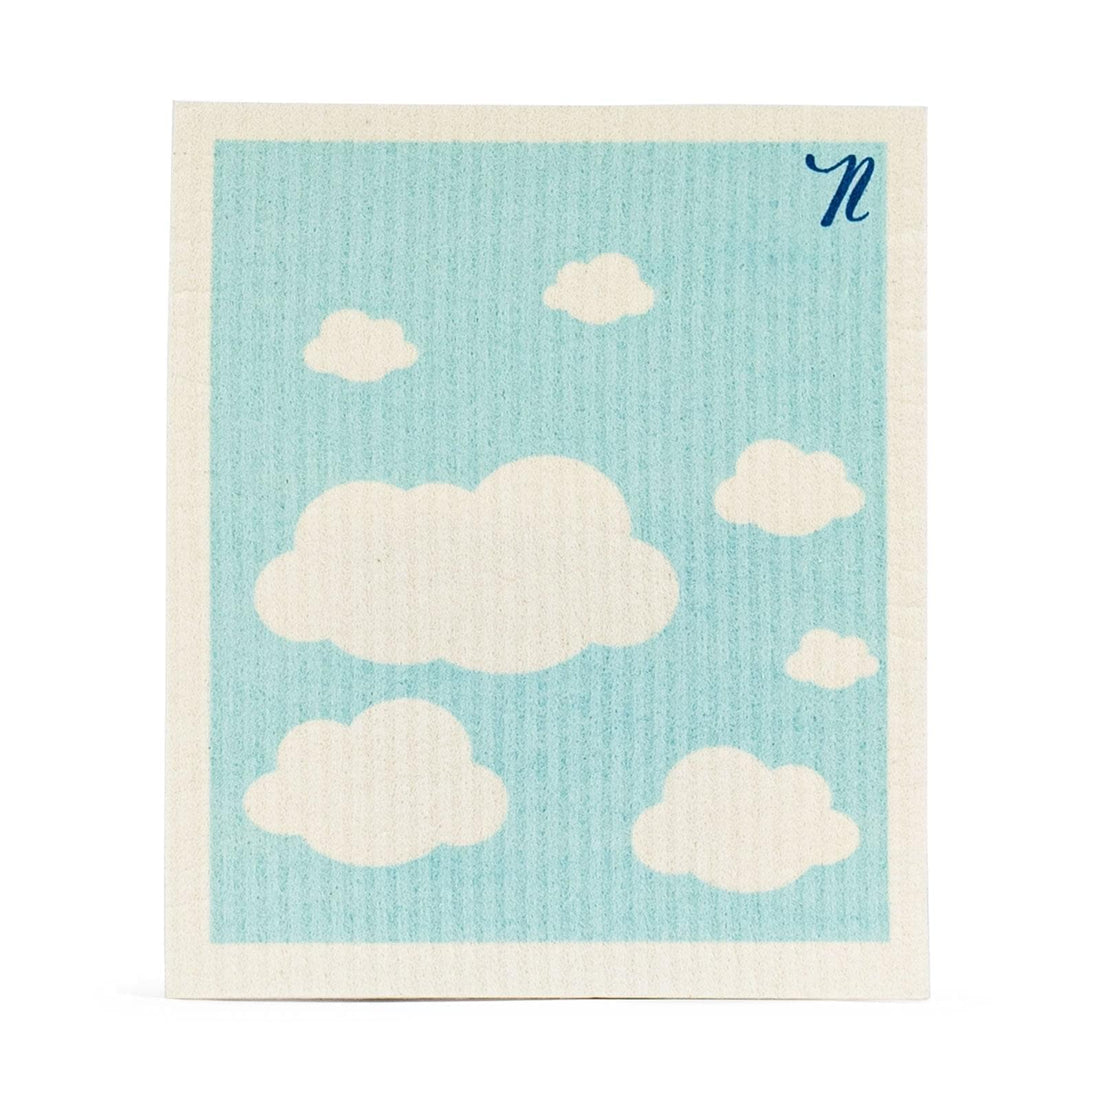 Blue, antibacterial and odourless Swedish Dishcloth with white cloud print